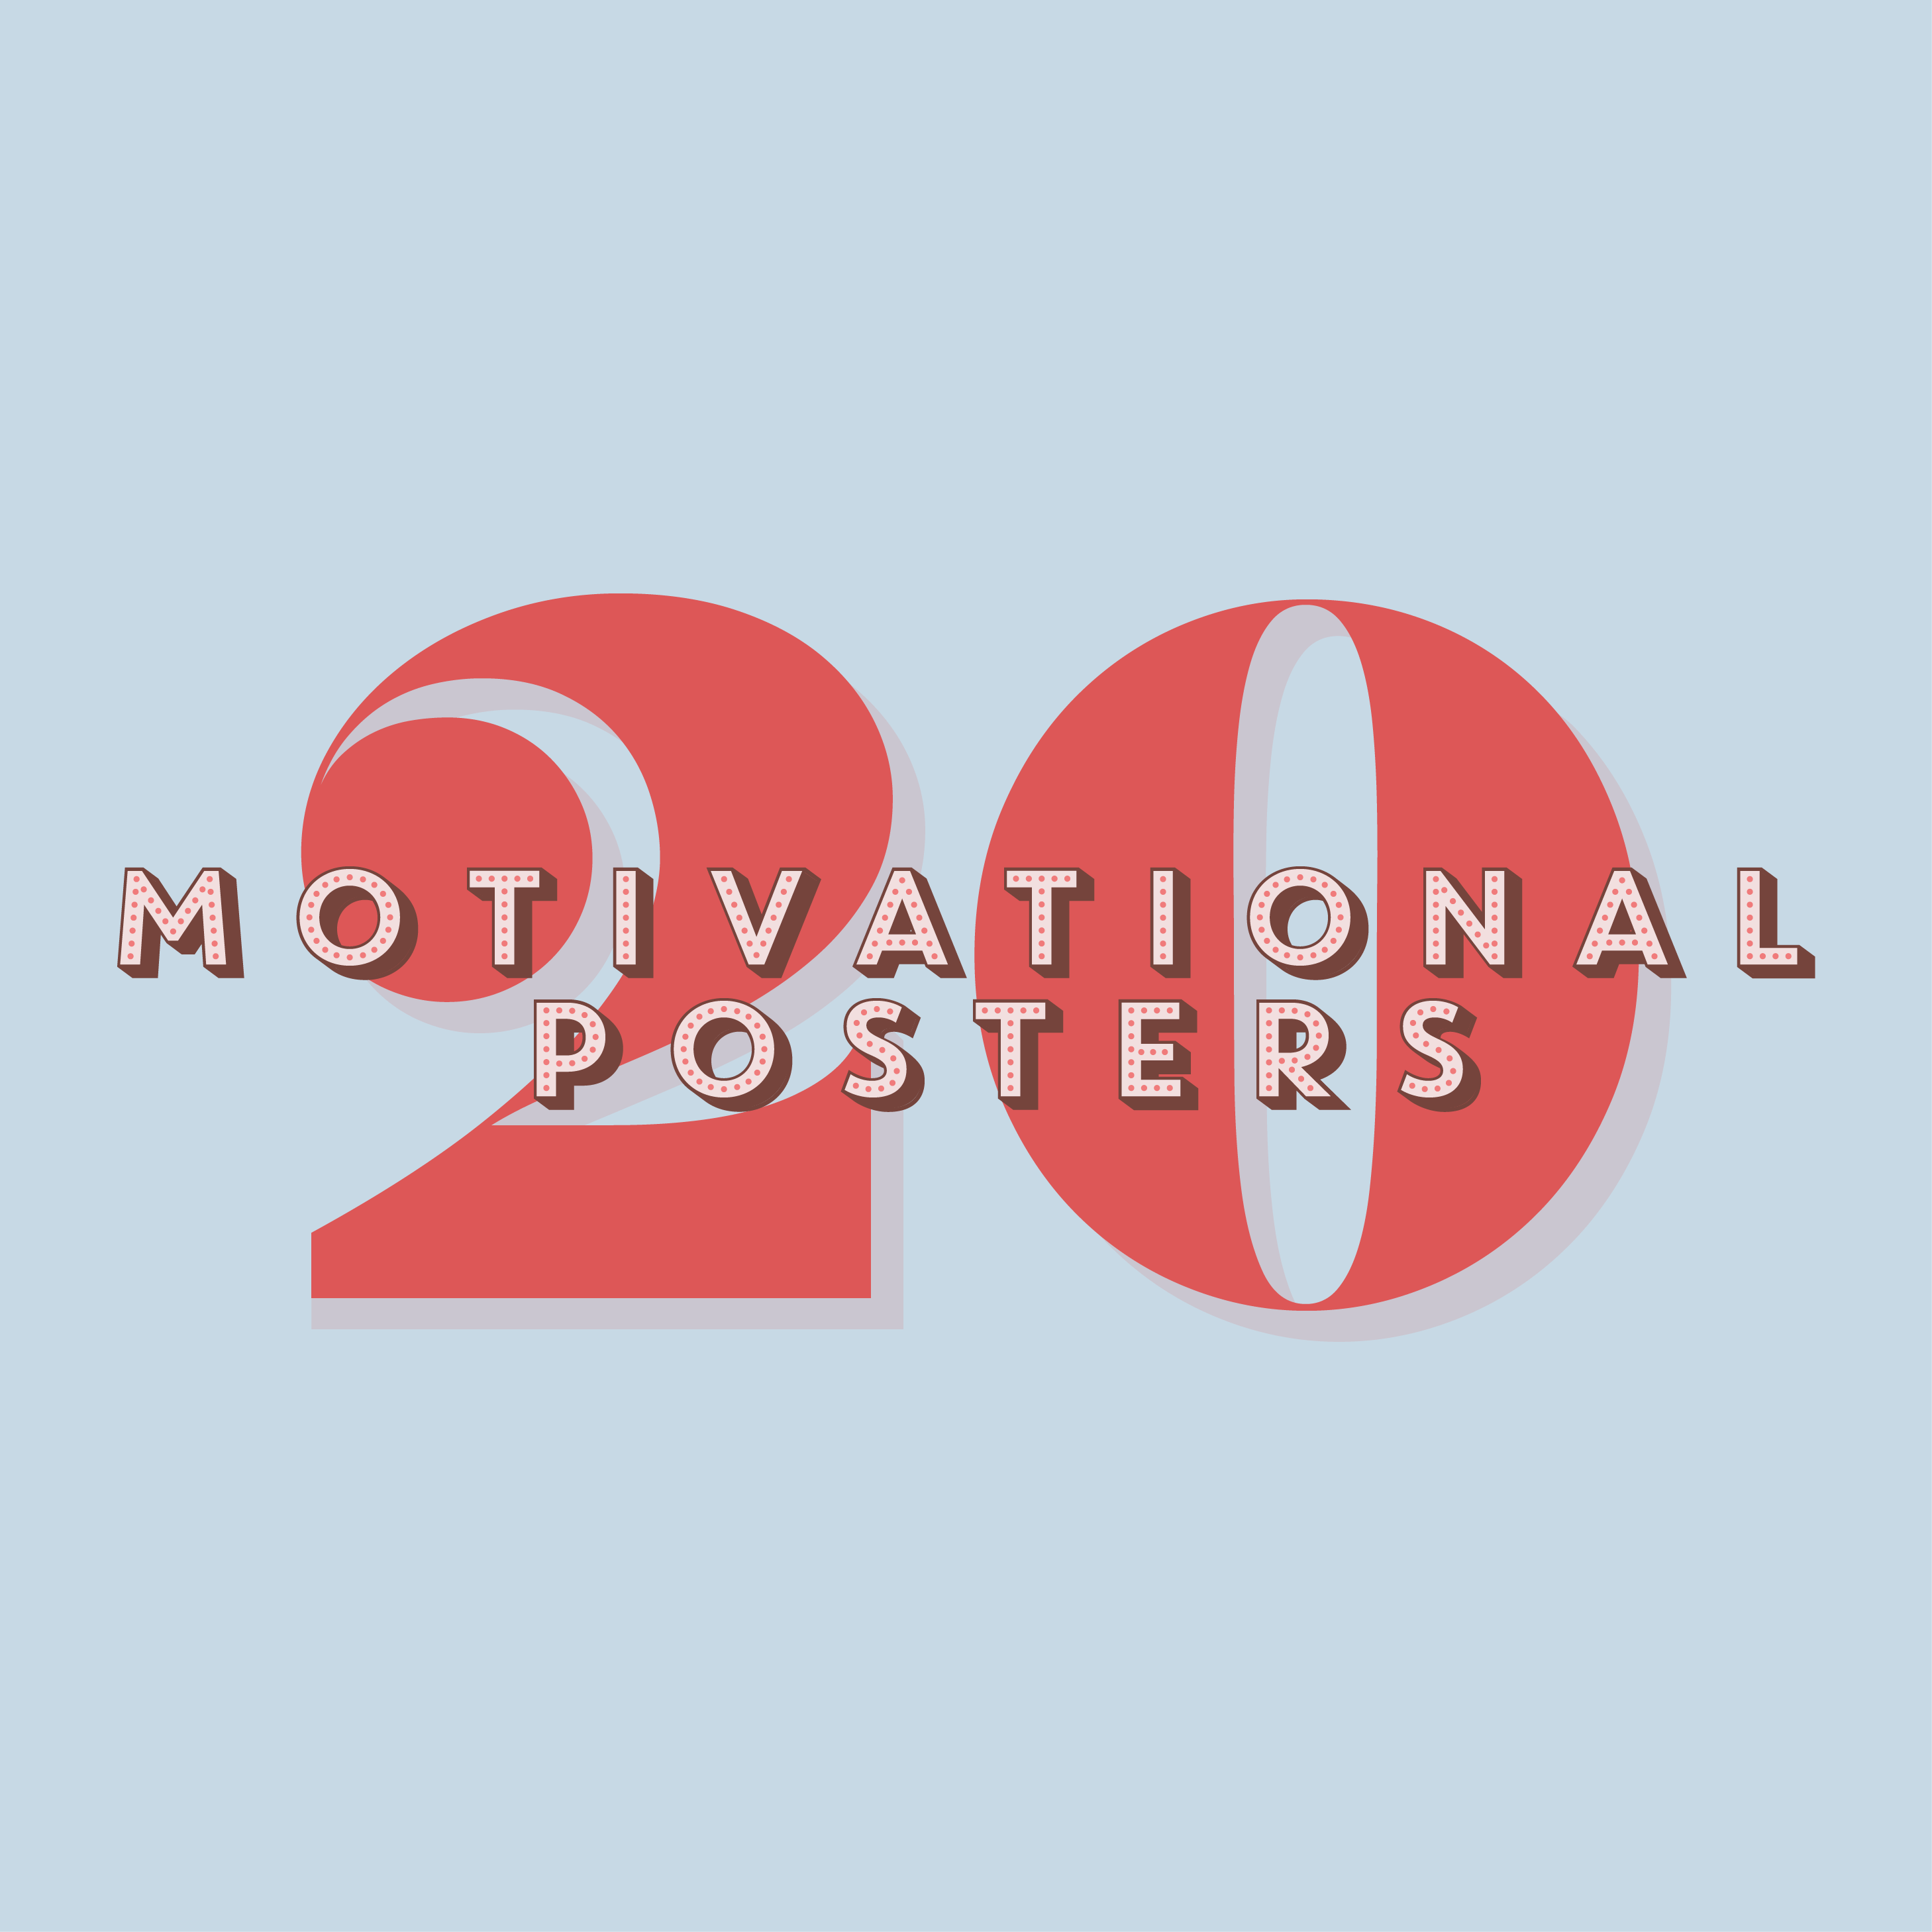 Got Motives Logo - 20 motivational posters to get you through a slump – Learn